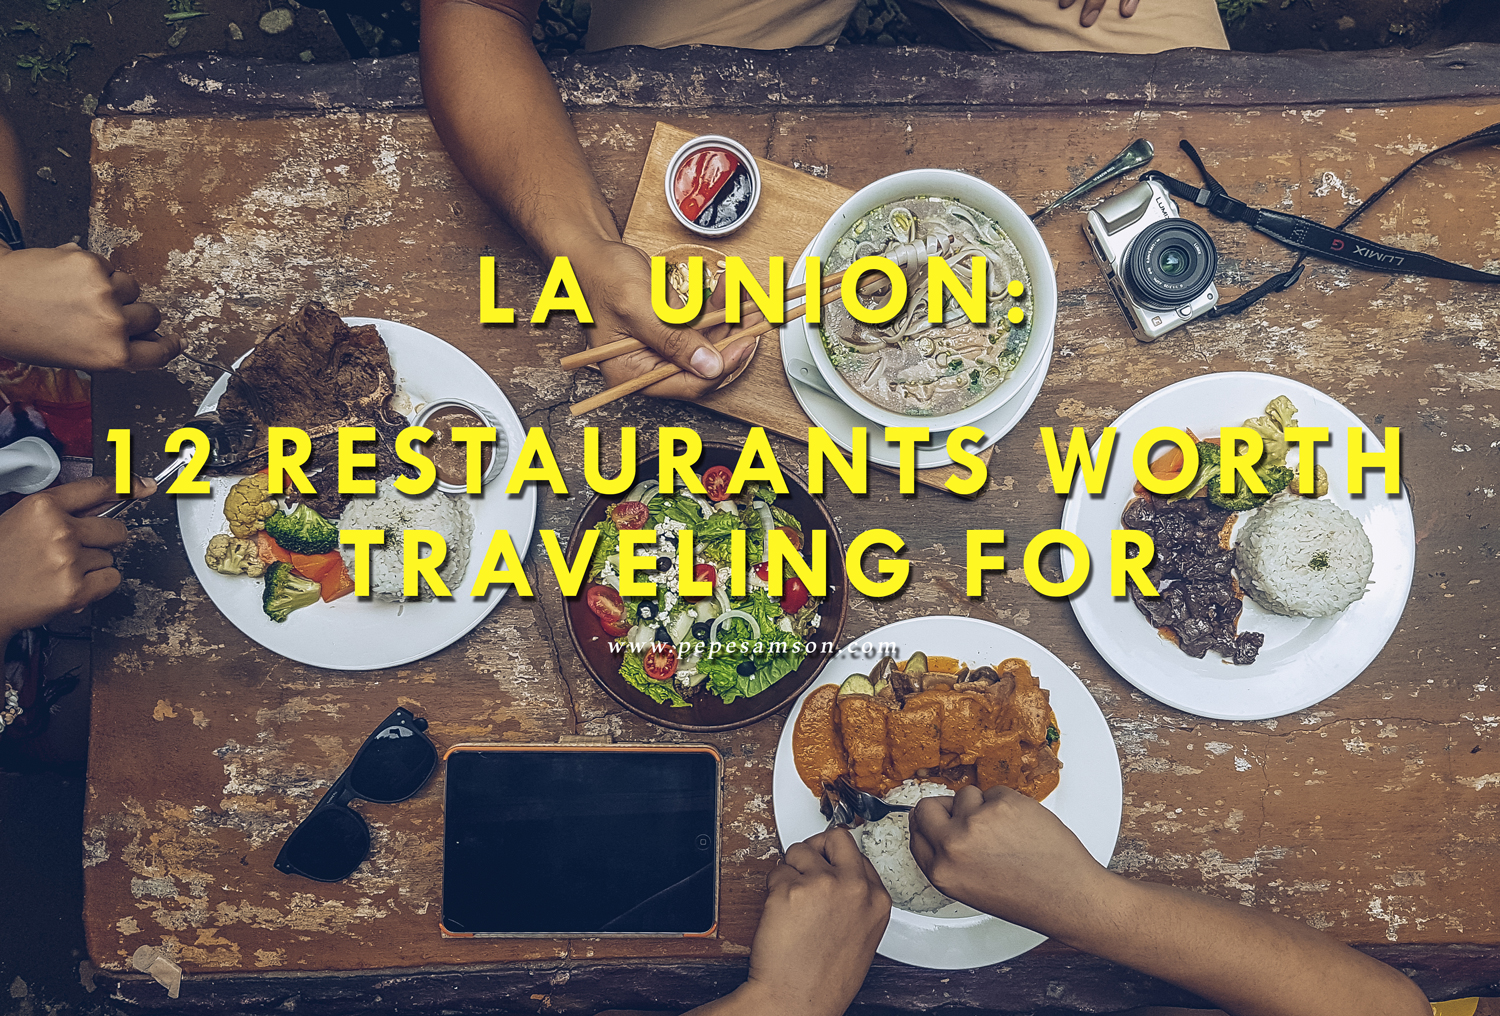 La Union Food Trip: 12 Restaurants Worth Traveling For [UPDATED AUGUST 2022]